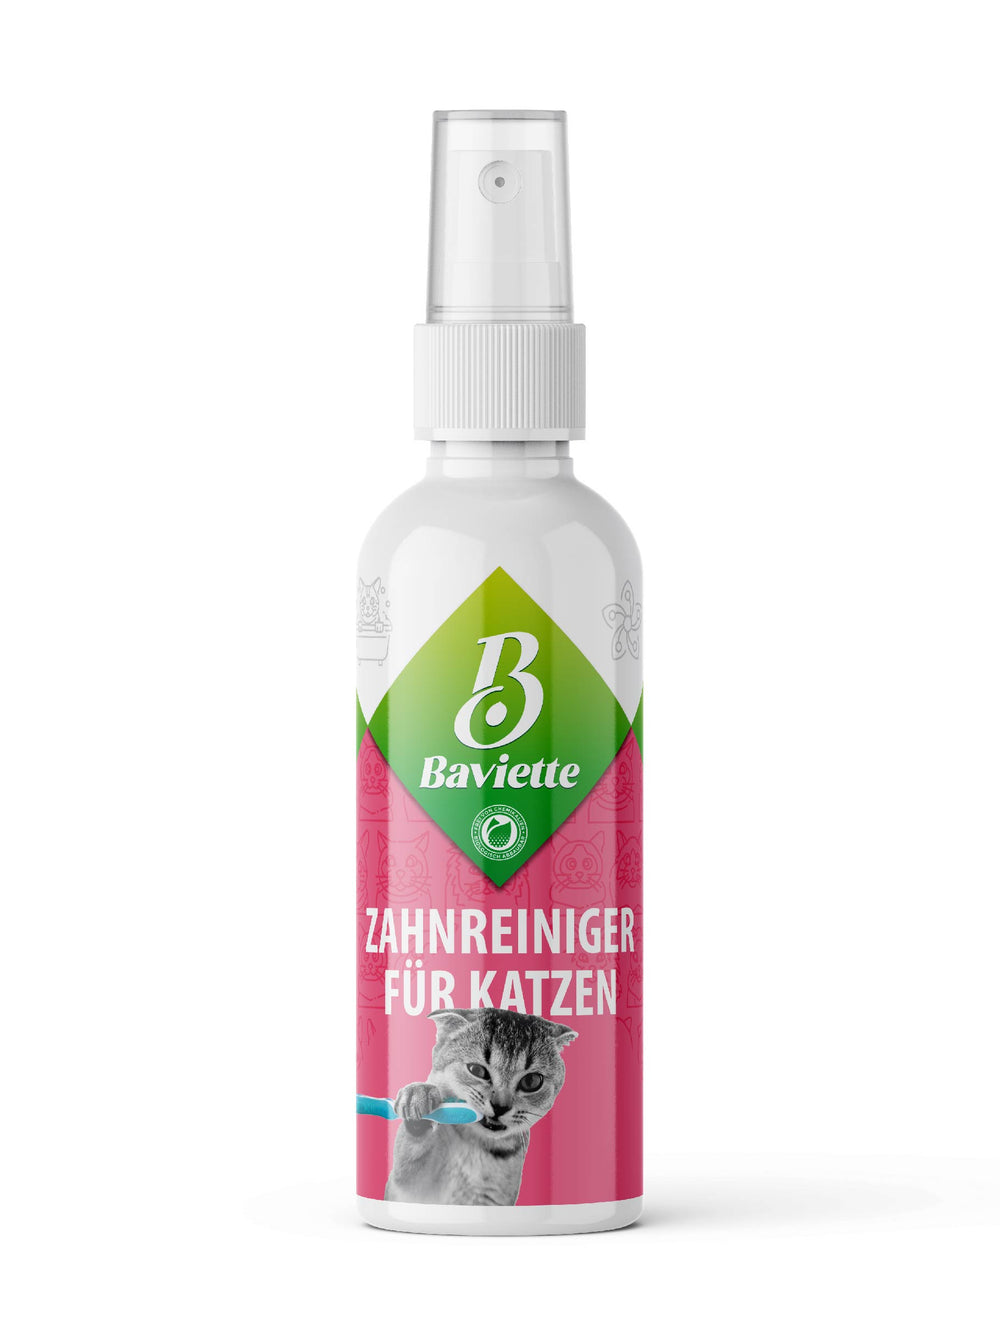 Dental cleaner for cats